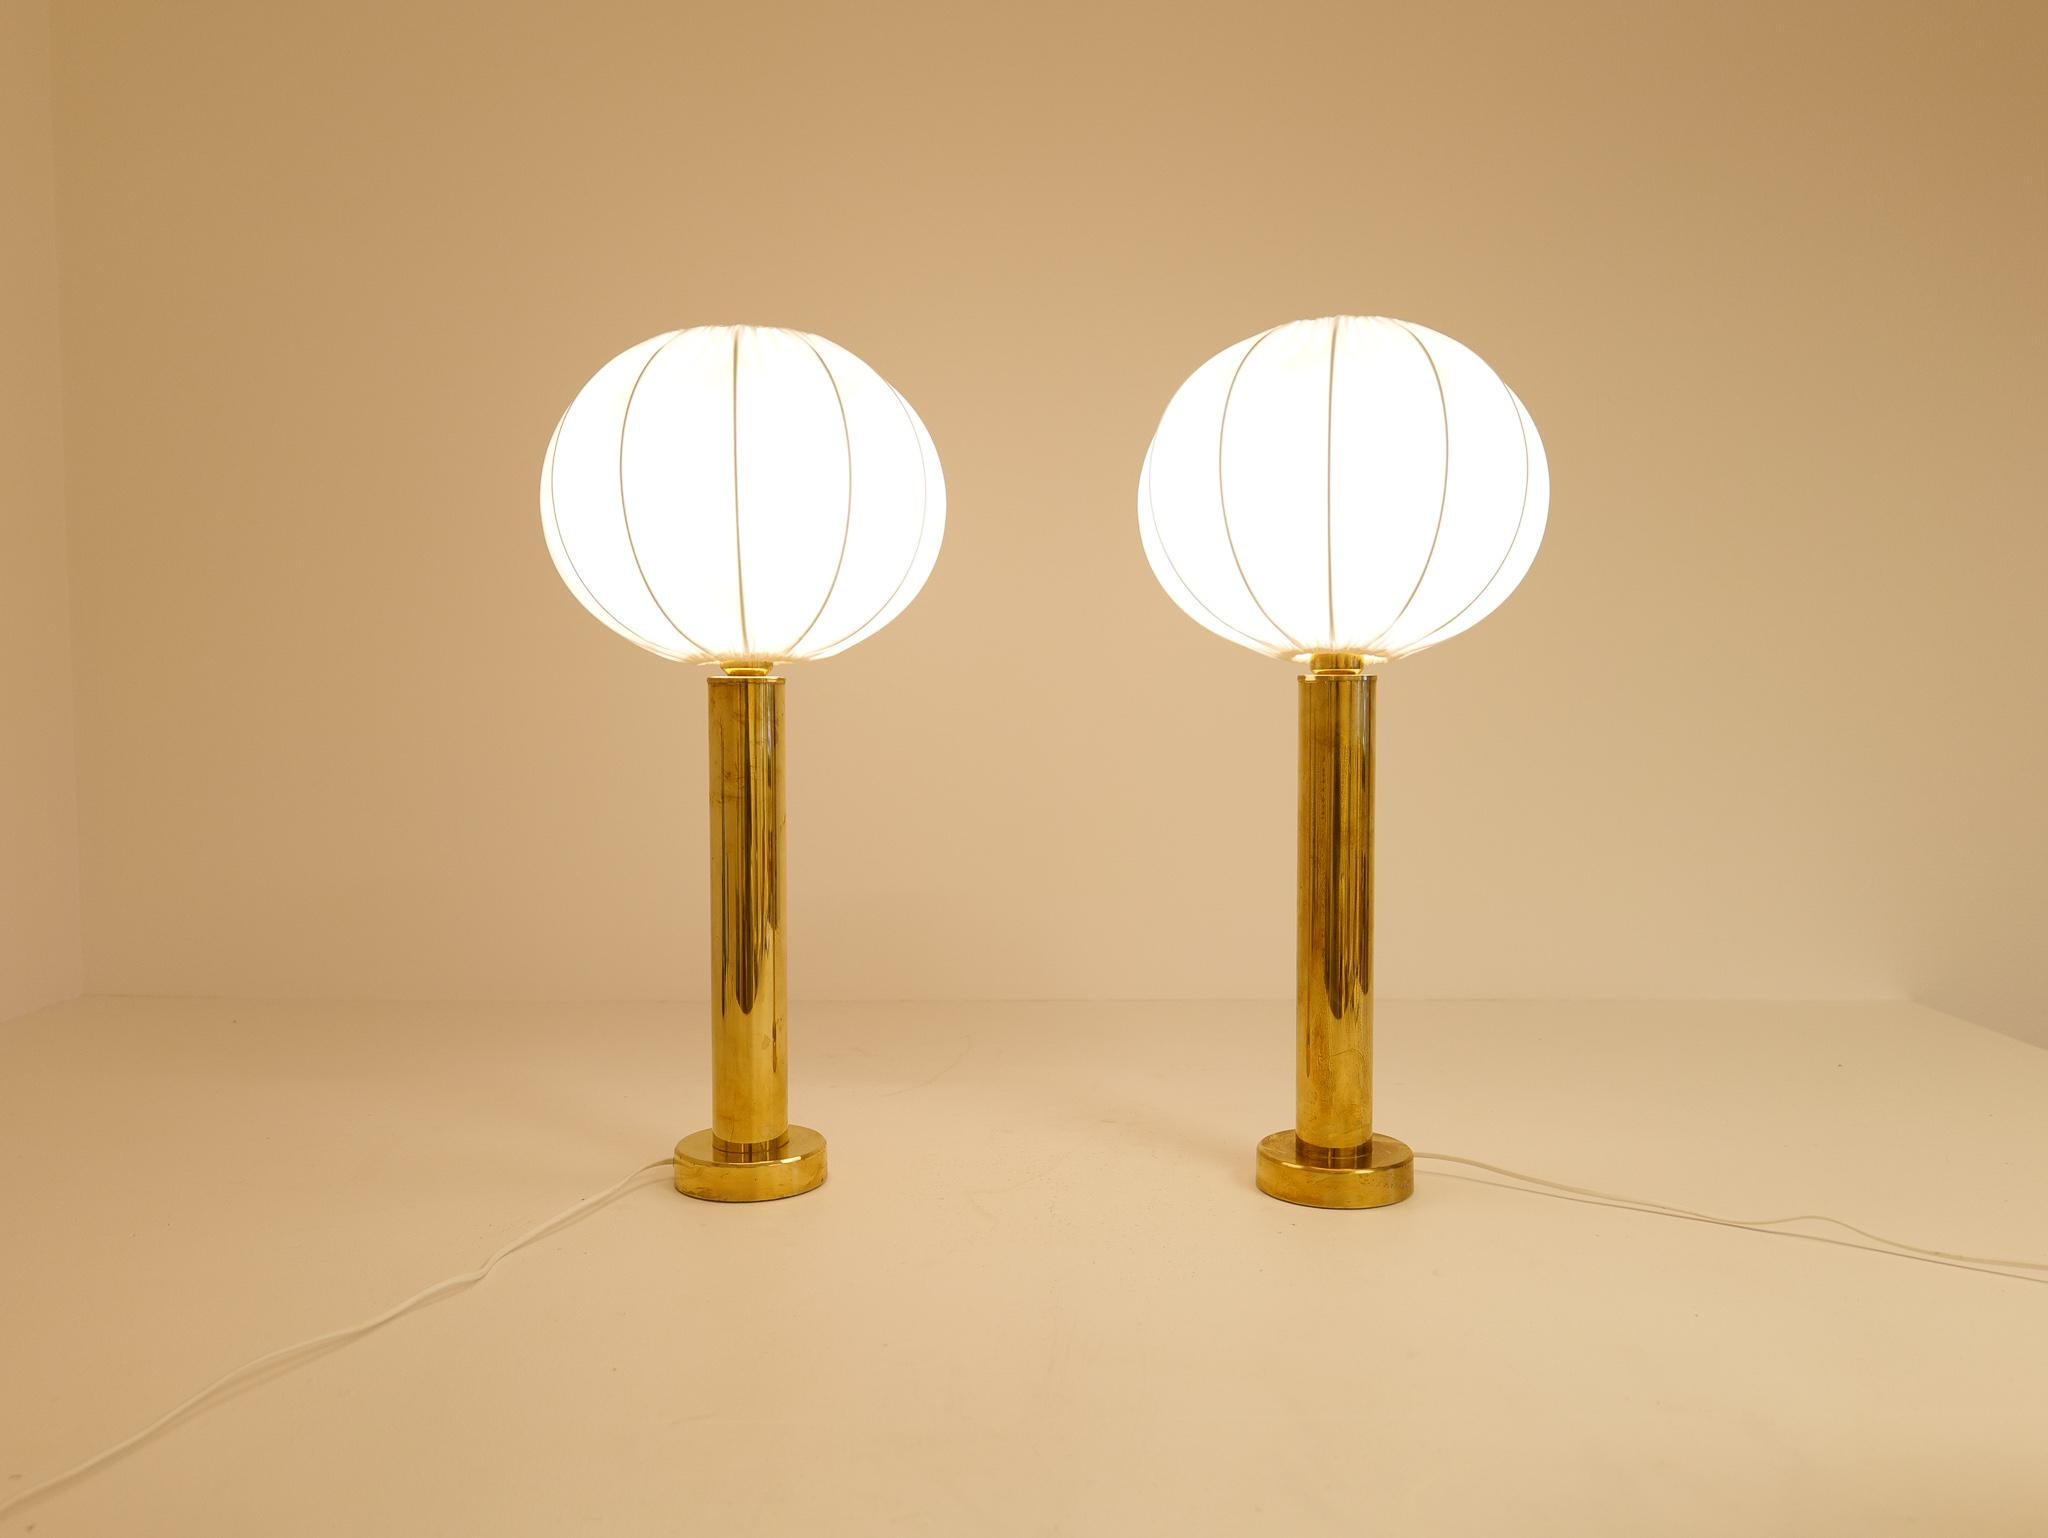 Midcentury Pair of Brass Table Lamps by Kosta Elarmatur, Sweden, 1960s For Sale 9